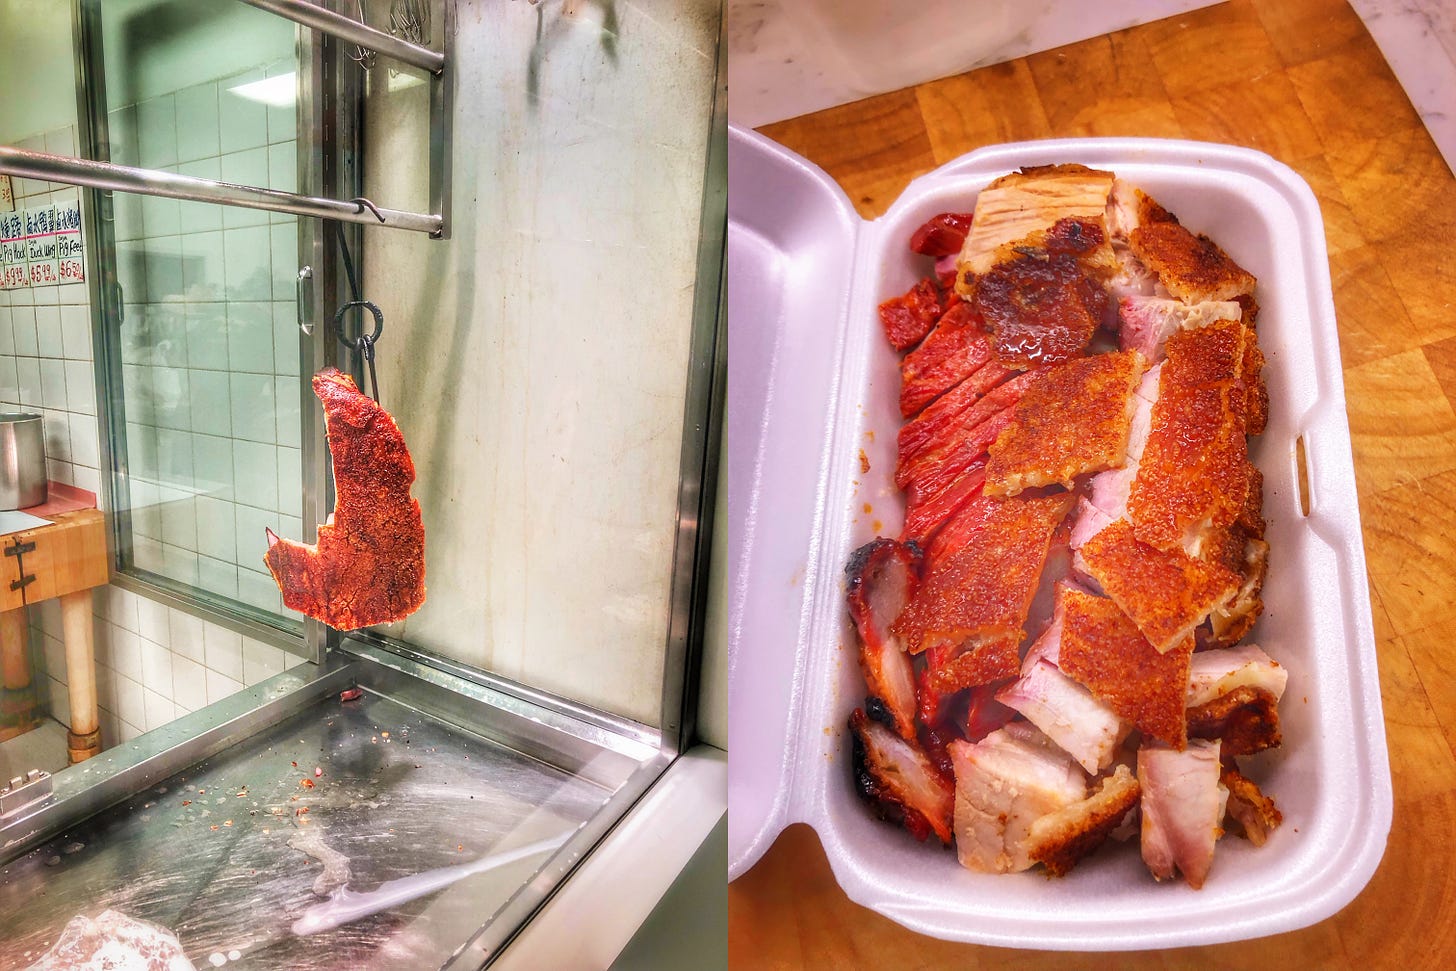 Two photos. The first was taken at Kum Hong BBQ and shows a large piece of roast pork hanging in a display case. The second, taken at the writer's home, shows a very neatly packed styrofoam container of BBQ pork and roast pork with crisp pieces of skin on top.